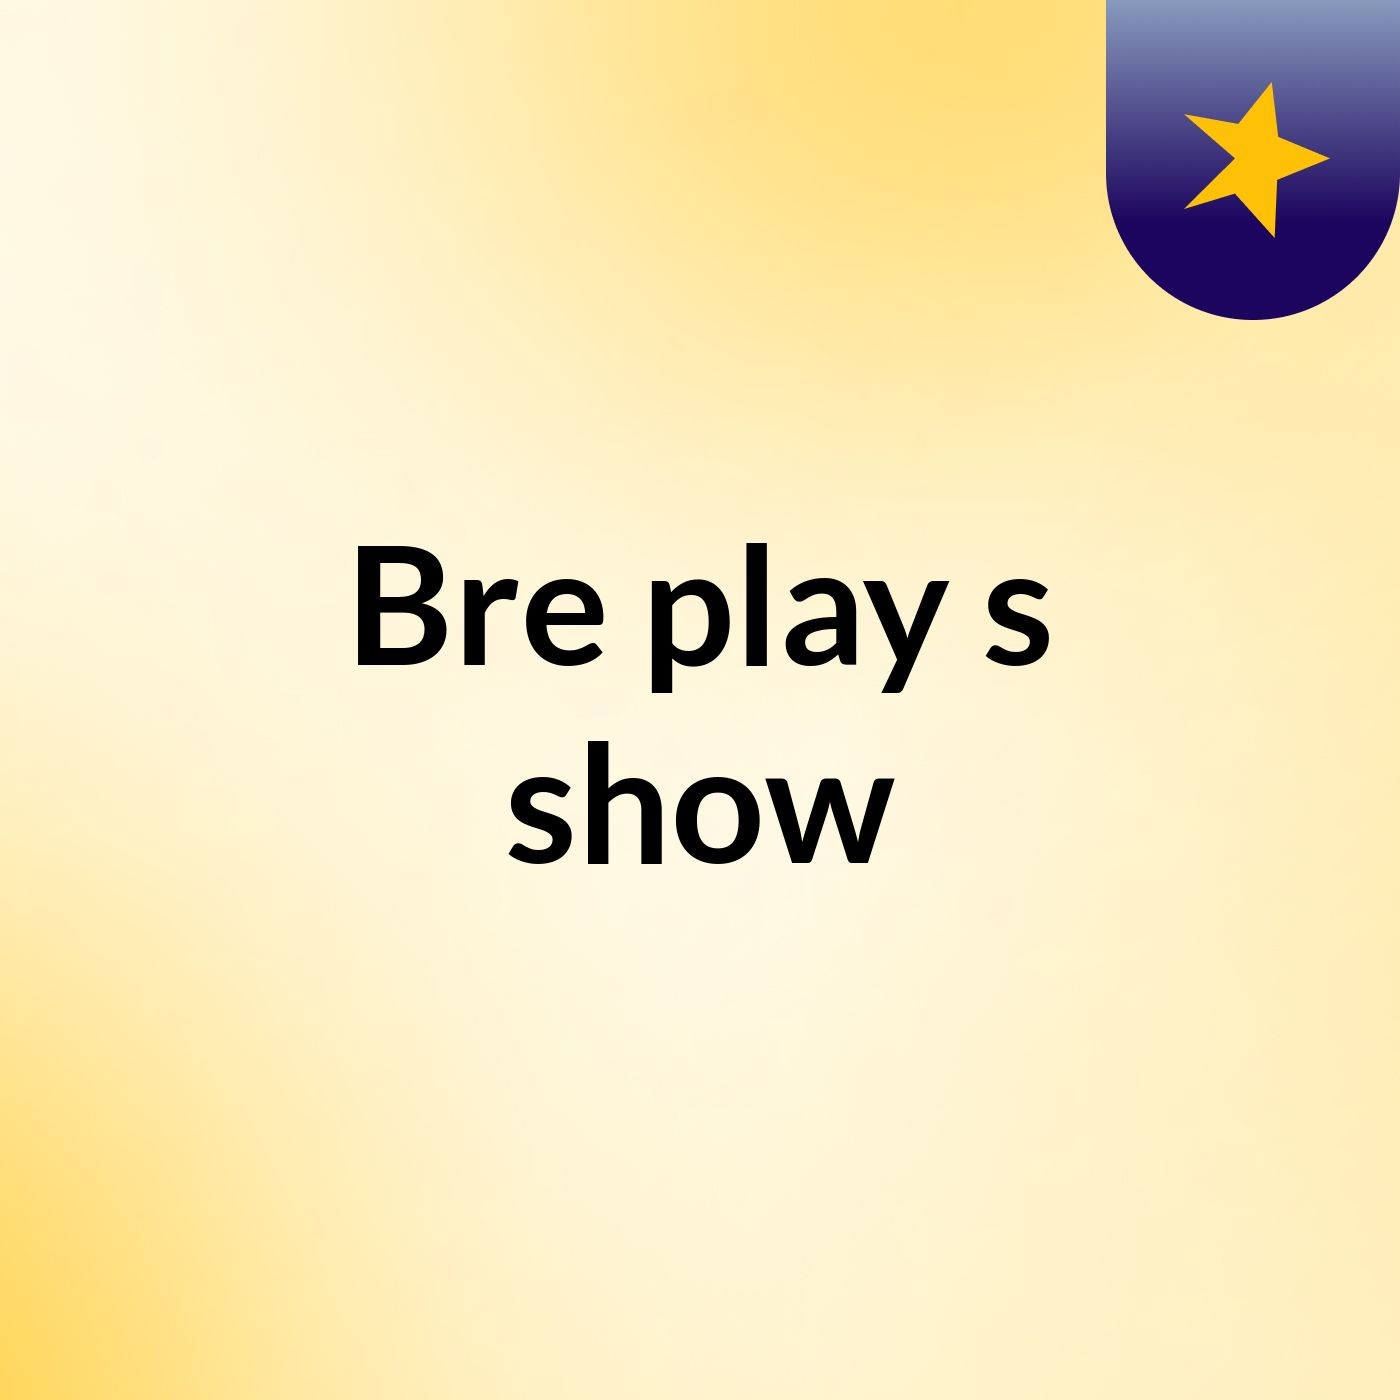 Bre play's show